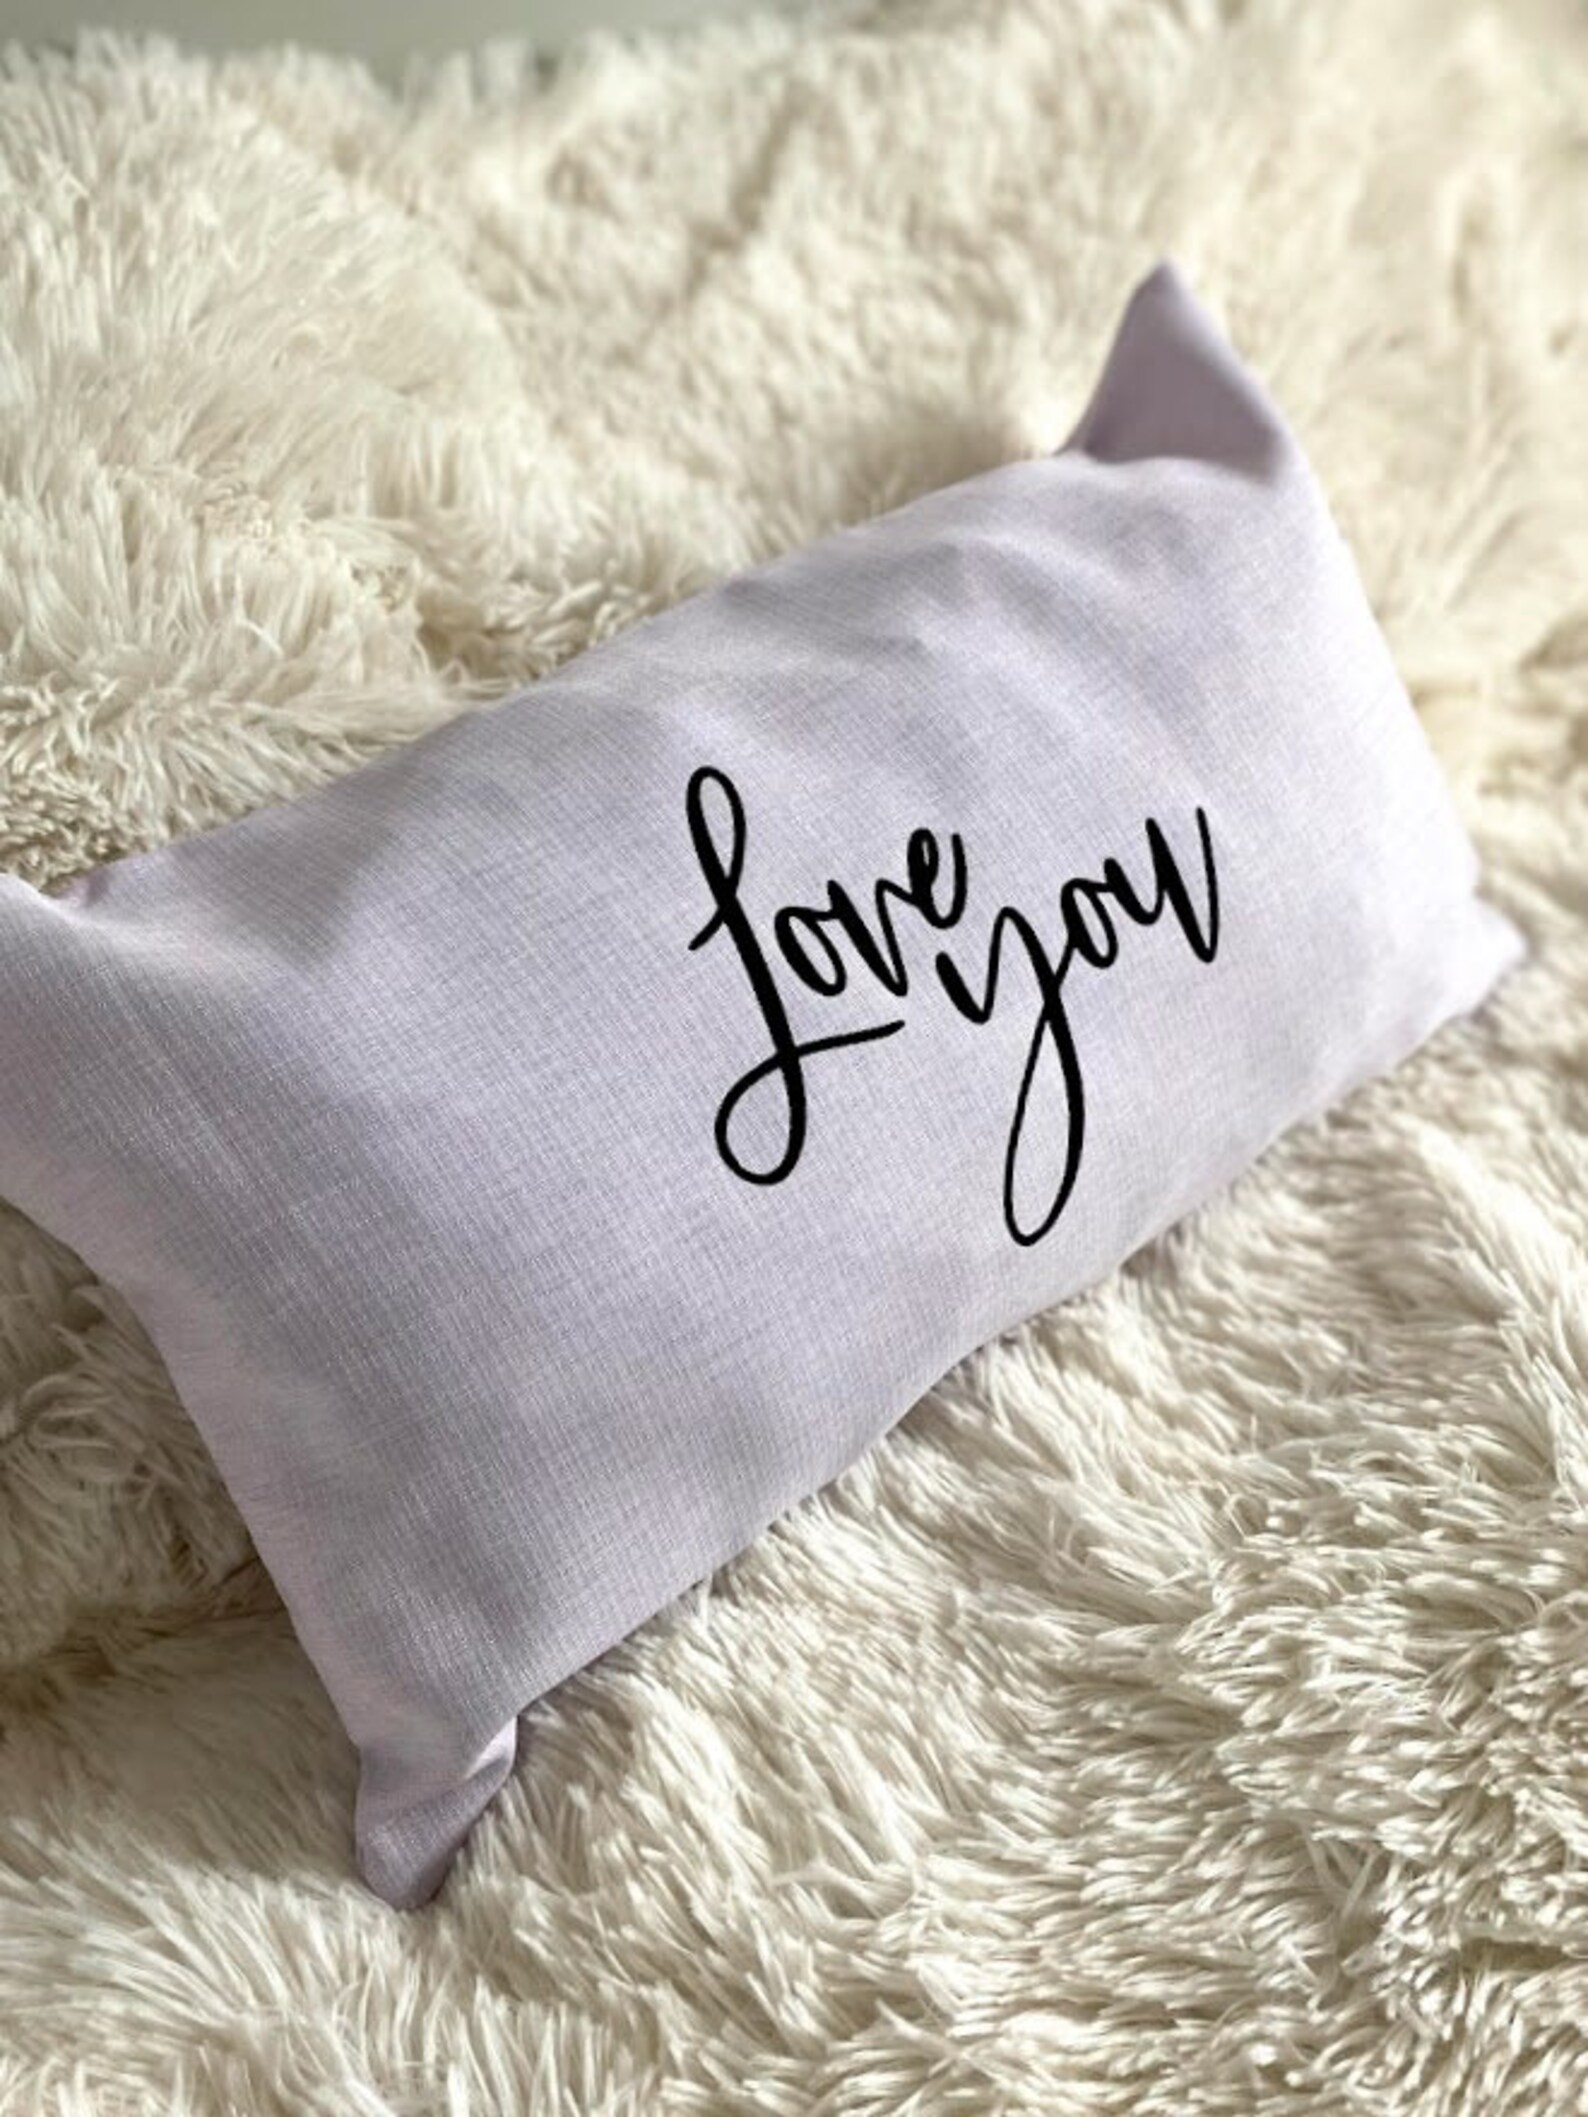 Love You pillow sham: Best holiday gifts under $15